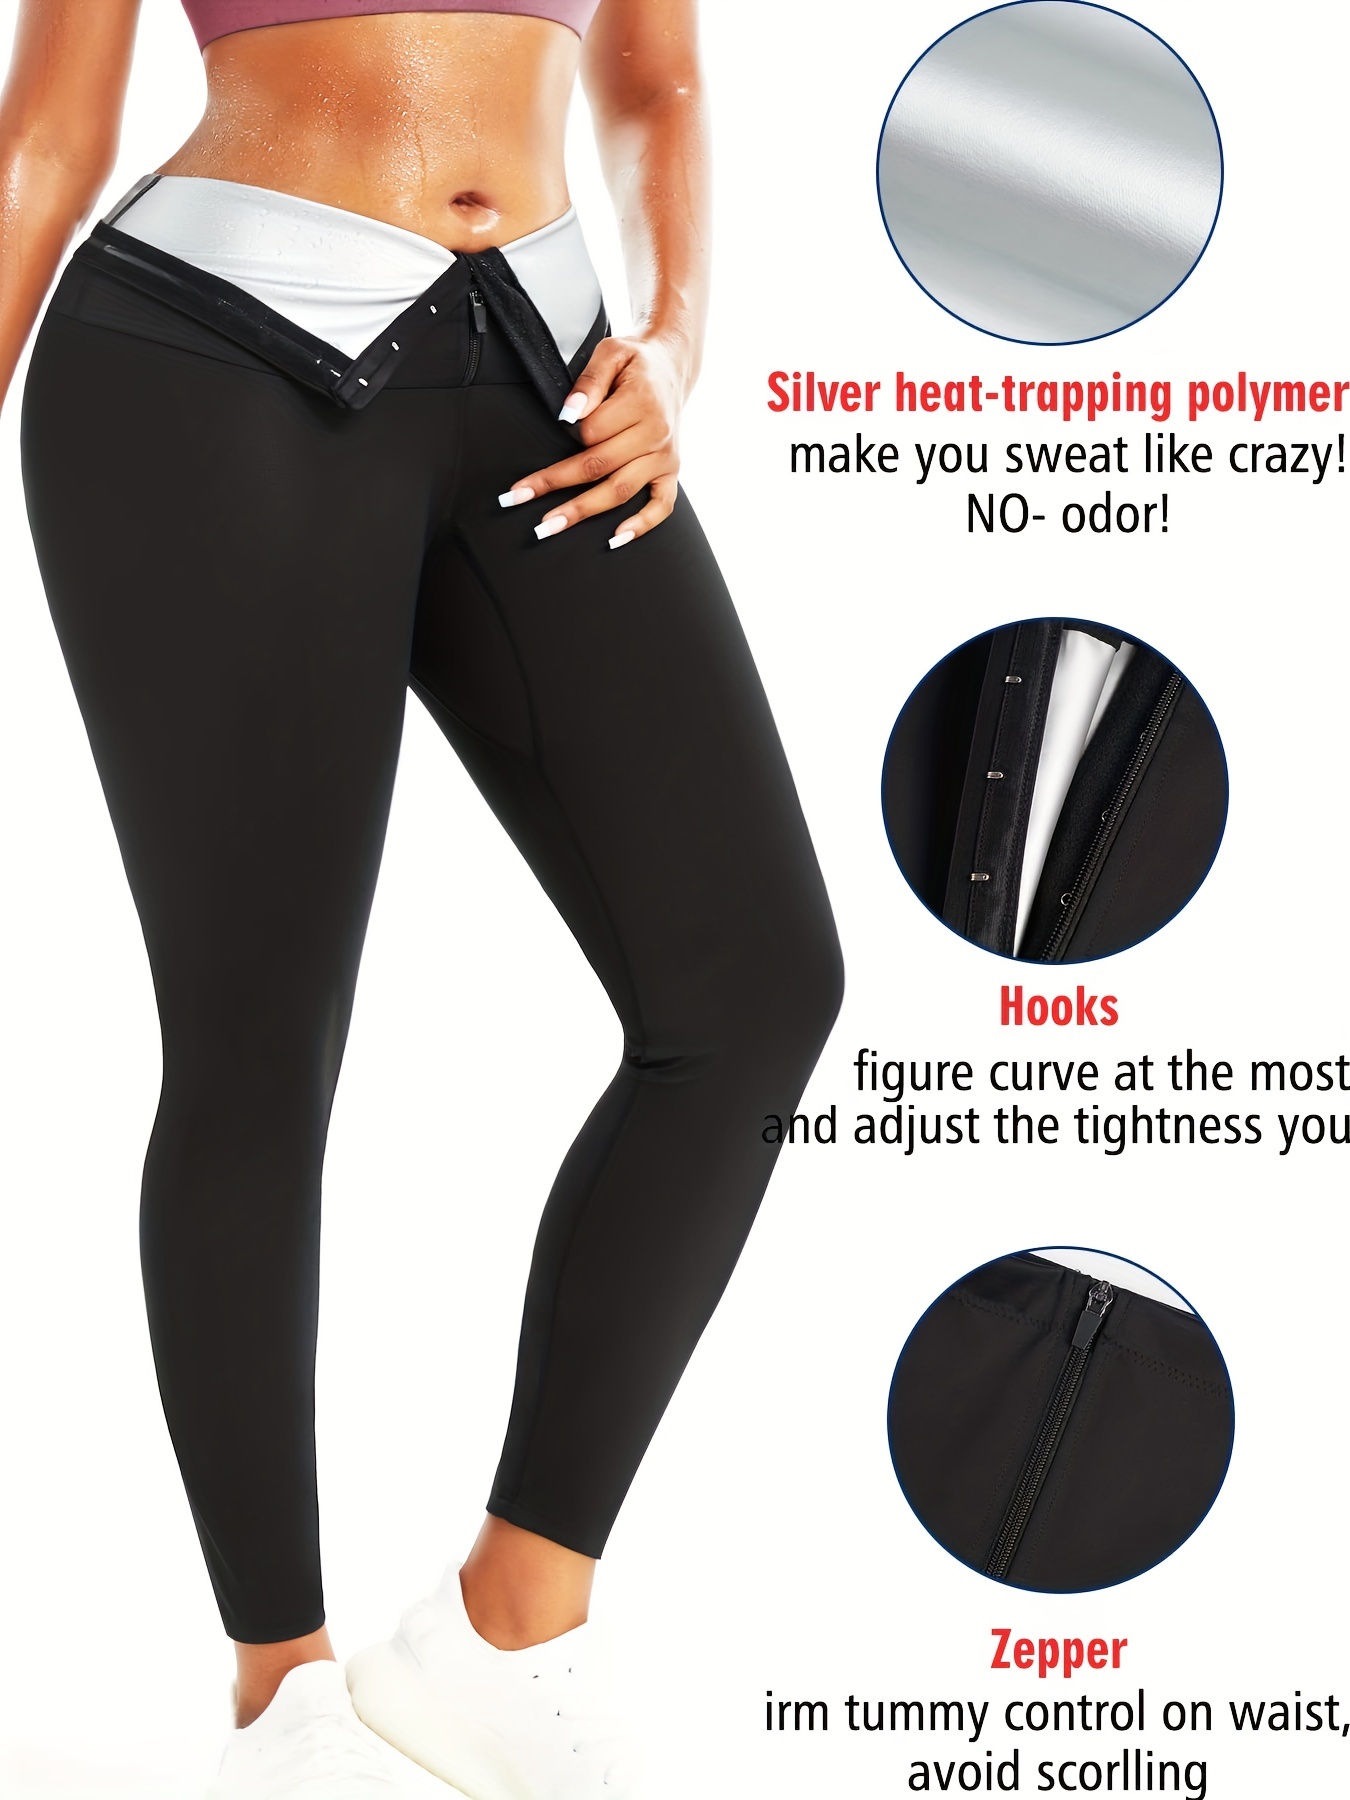 Lose Weight & Look Slimmer Instantly With Sauna Pants For Women - High  Waist Compression Leggings!